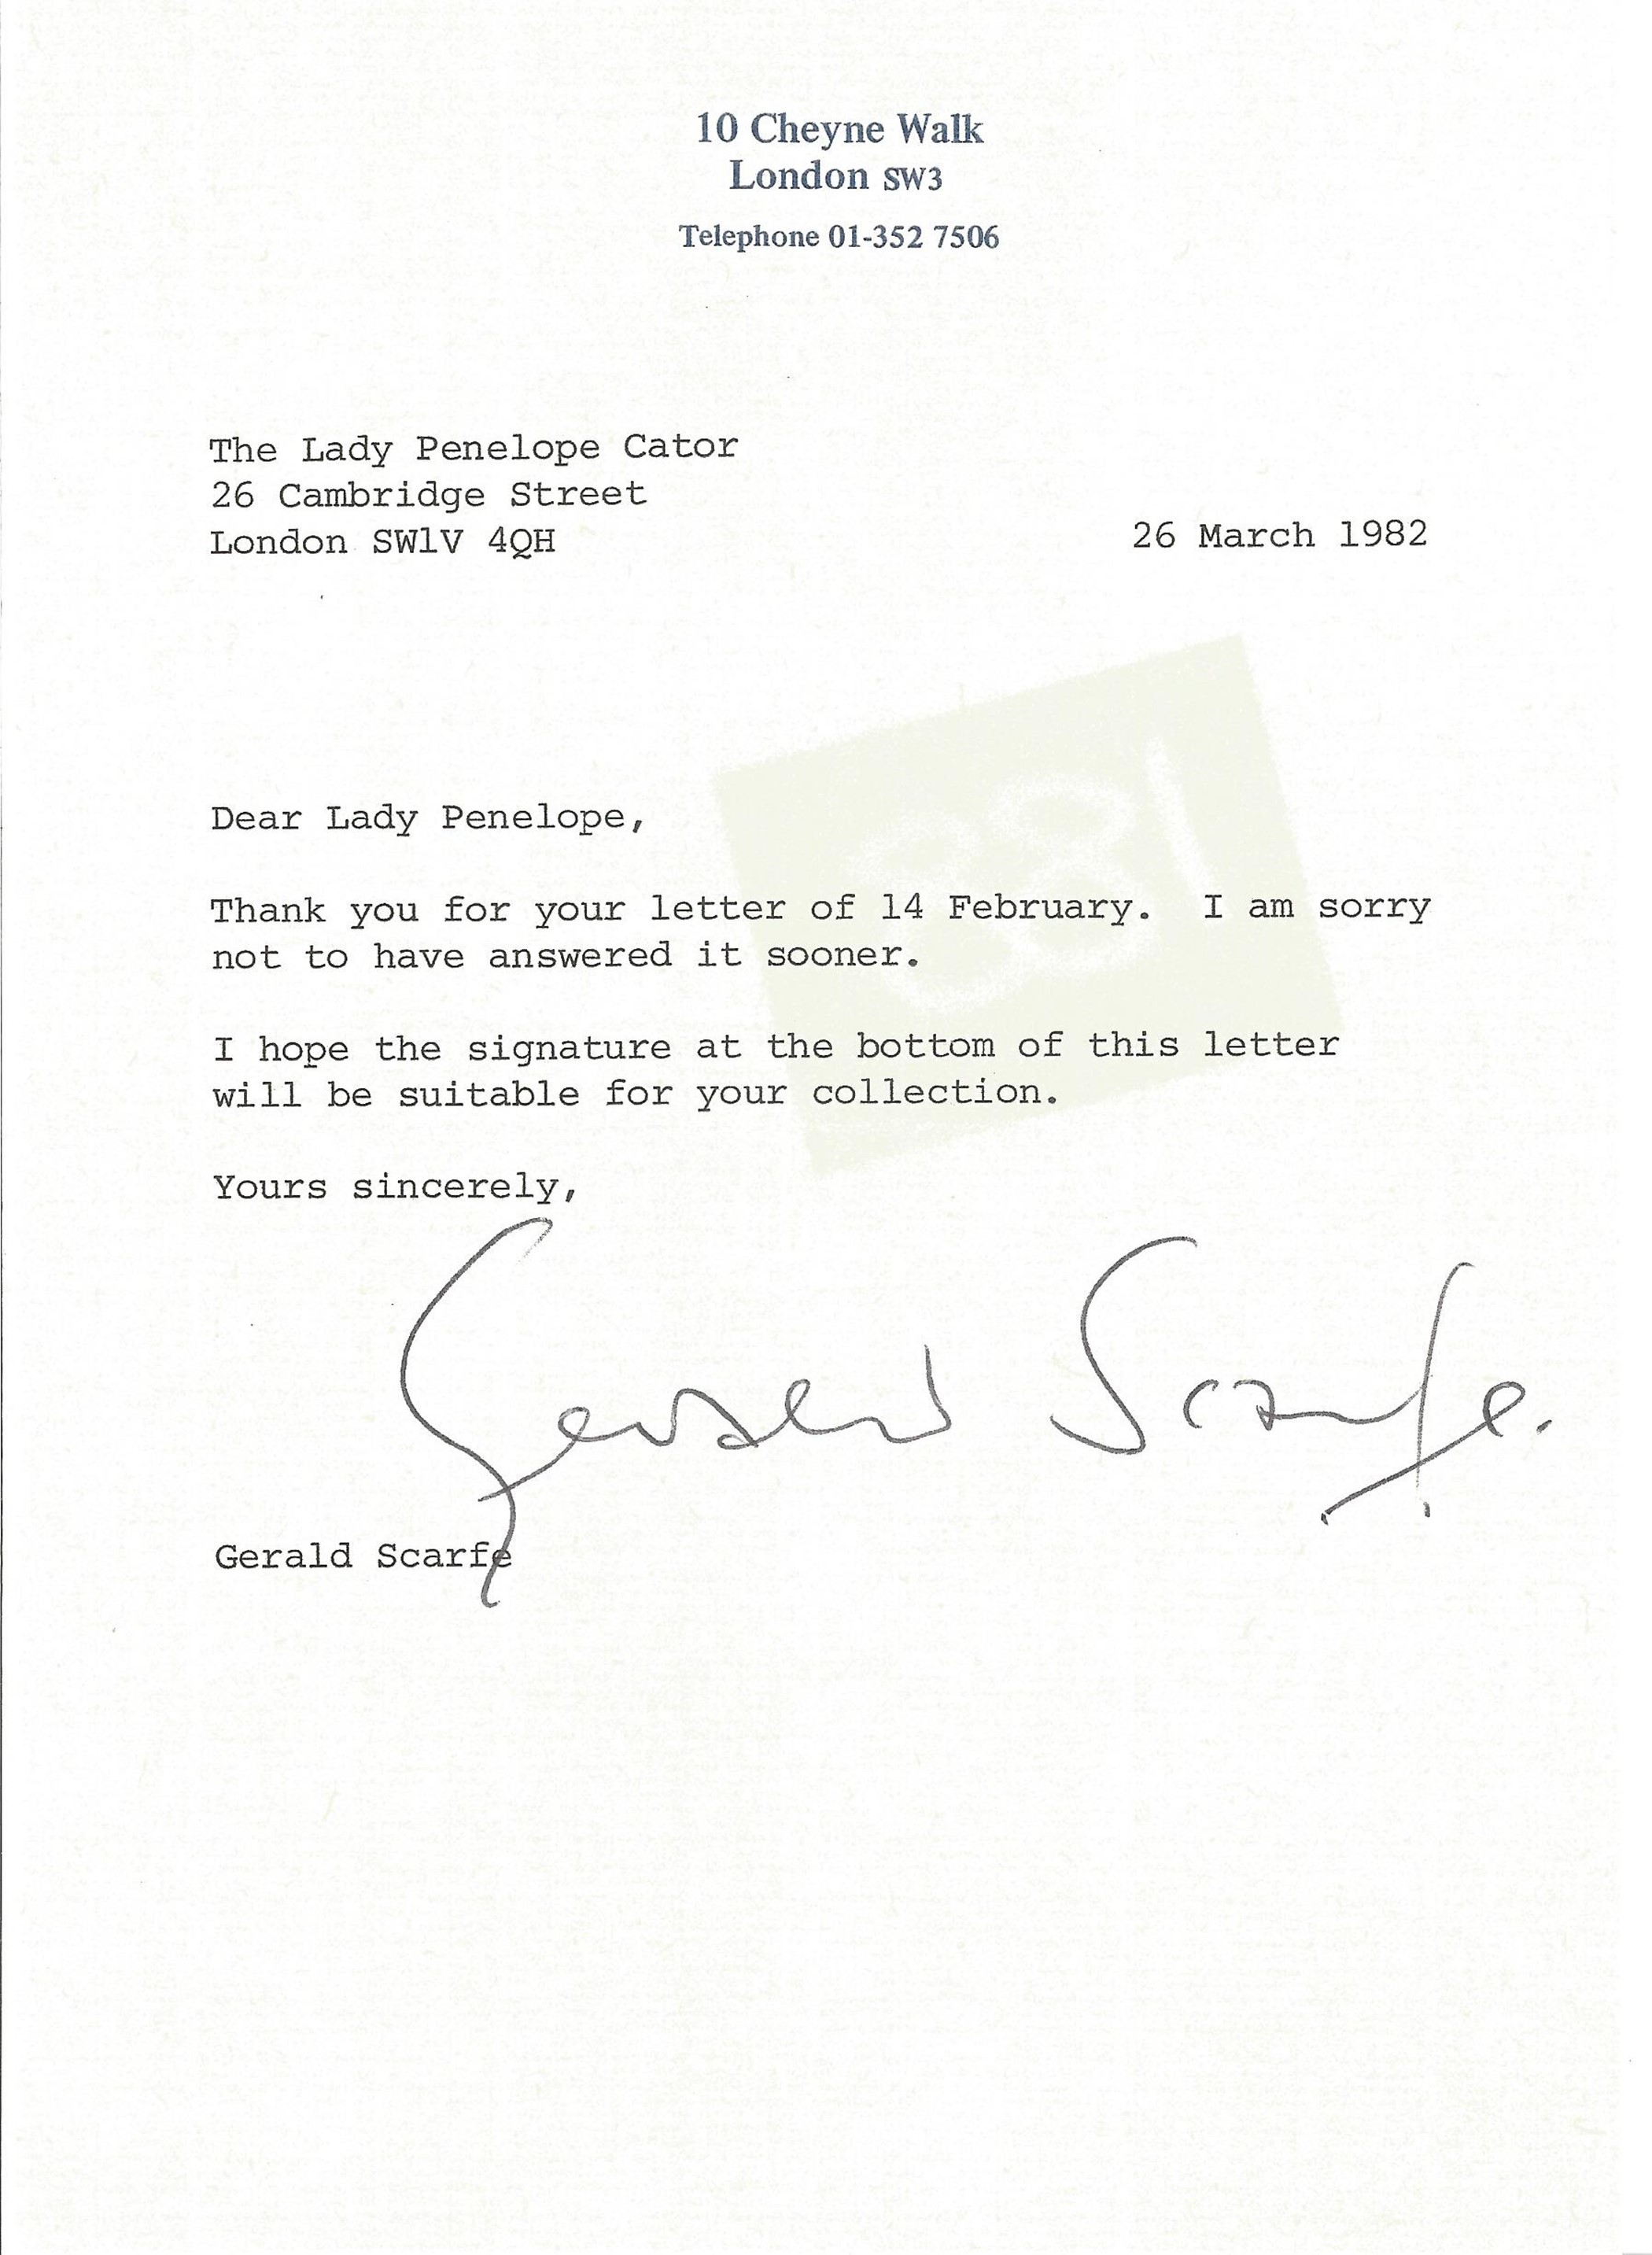 Gerald Scarfe TLS dated 26/3/1982. Good condition. All autographs come with a Certificate of